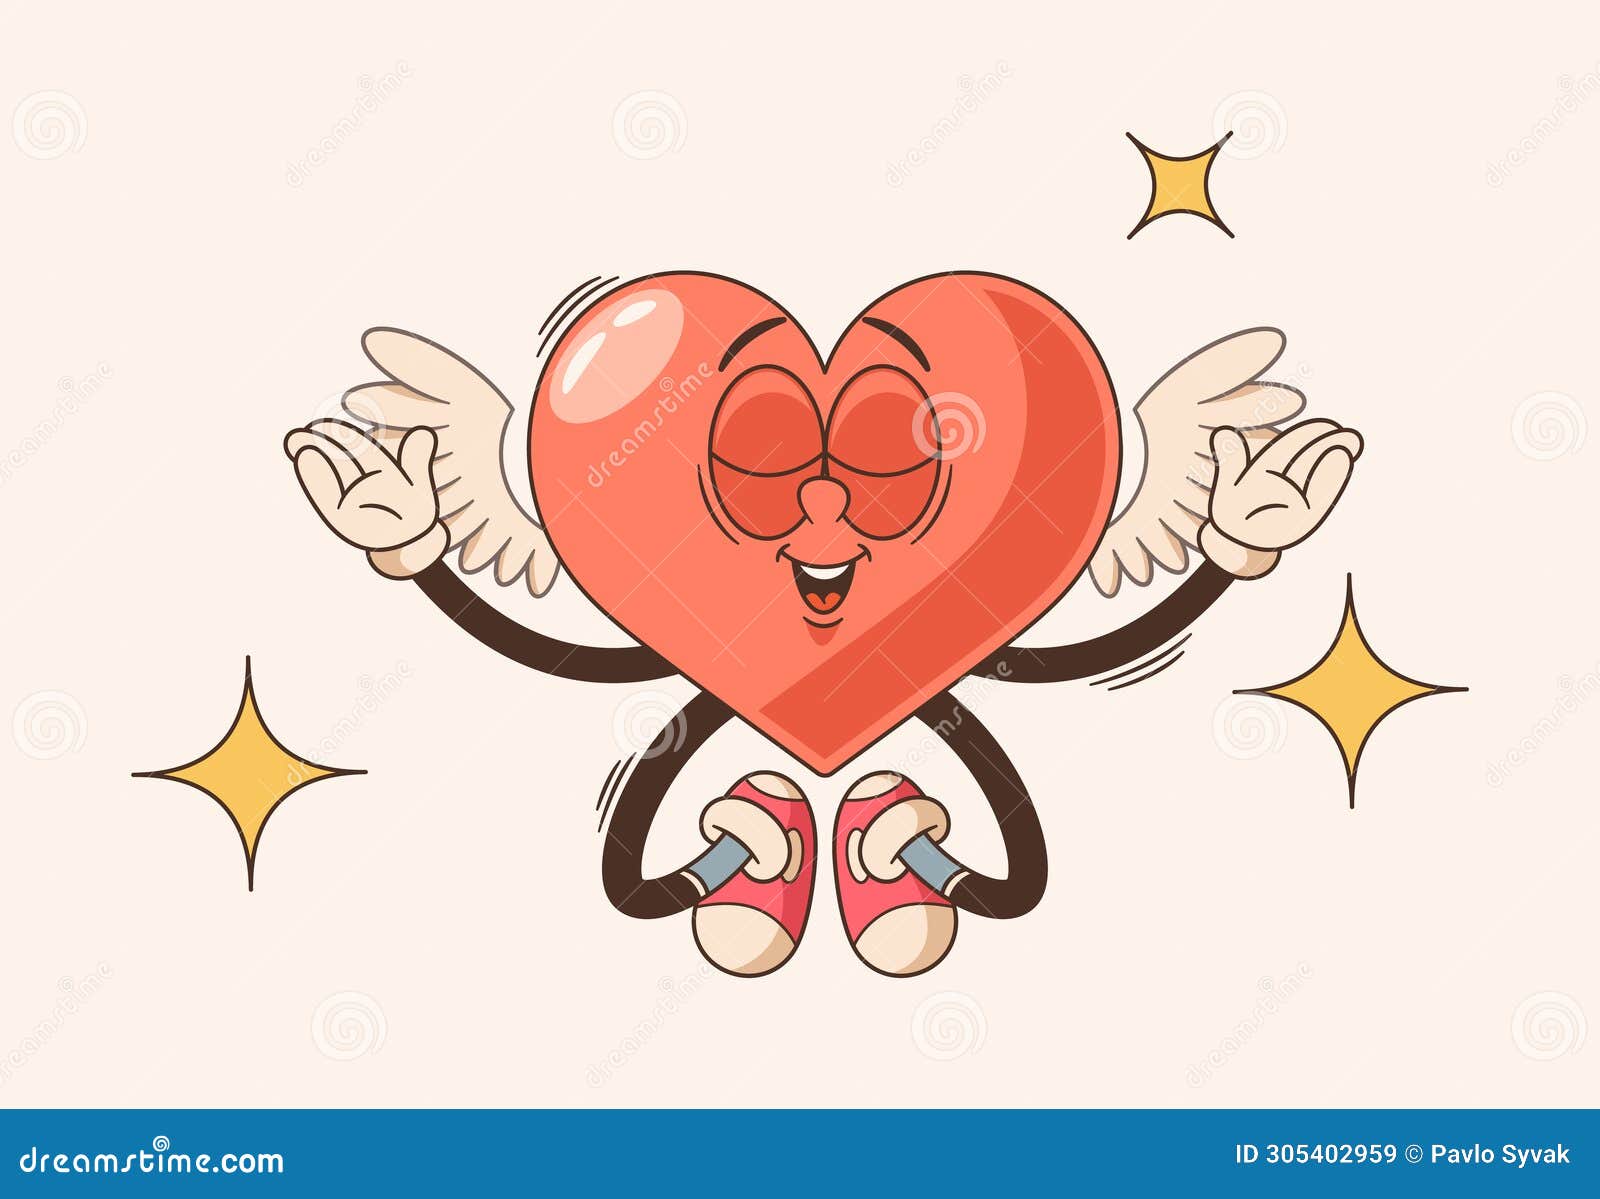 cherubic, vibrant heart character with nostalgic flair, reminiscent of classic cartoons. radiating love and joy